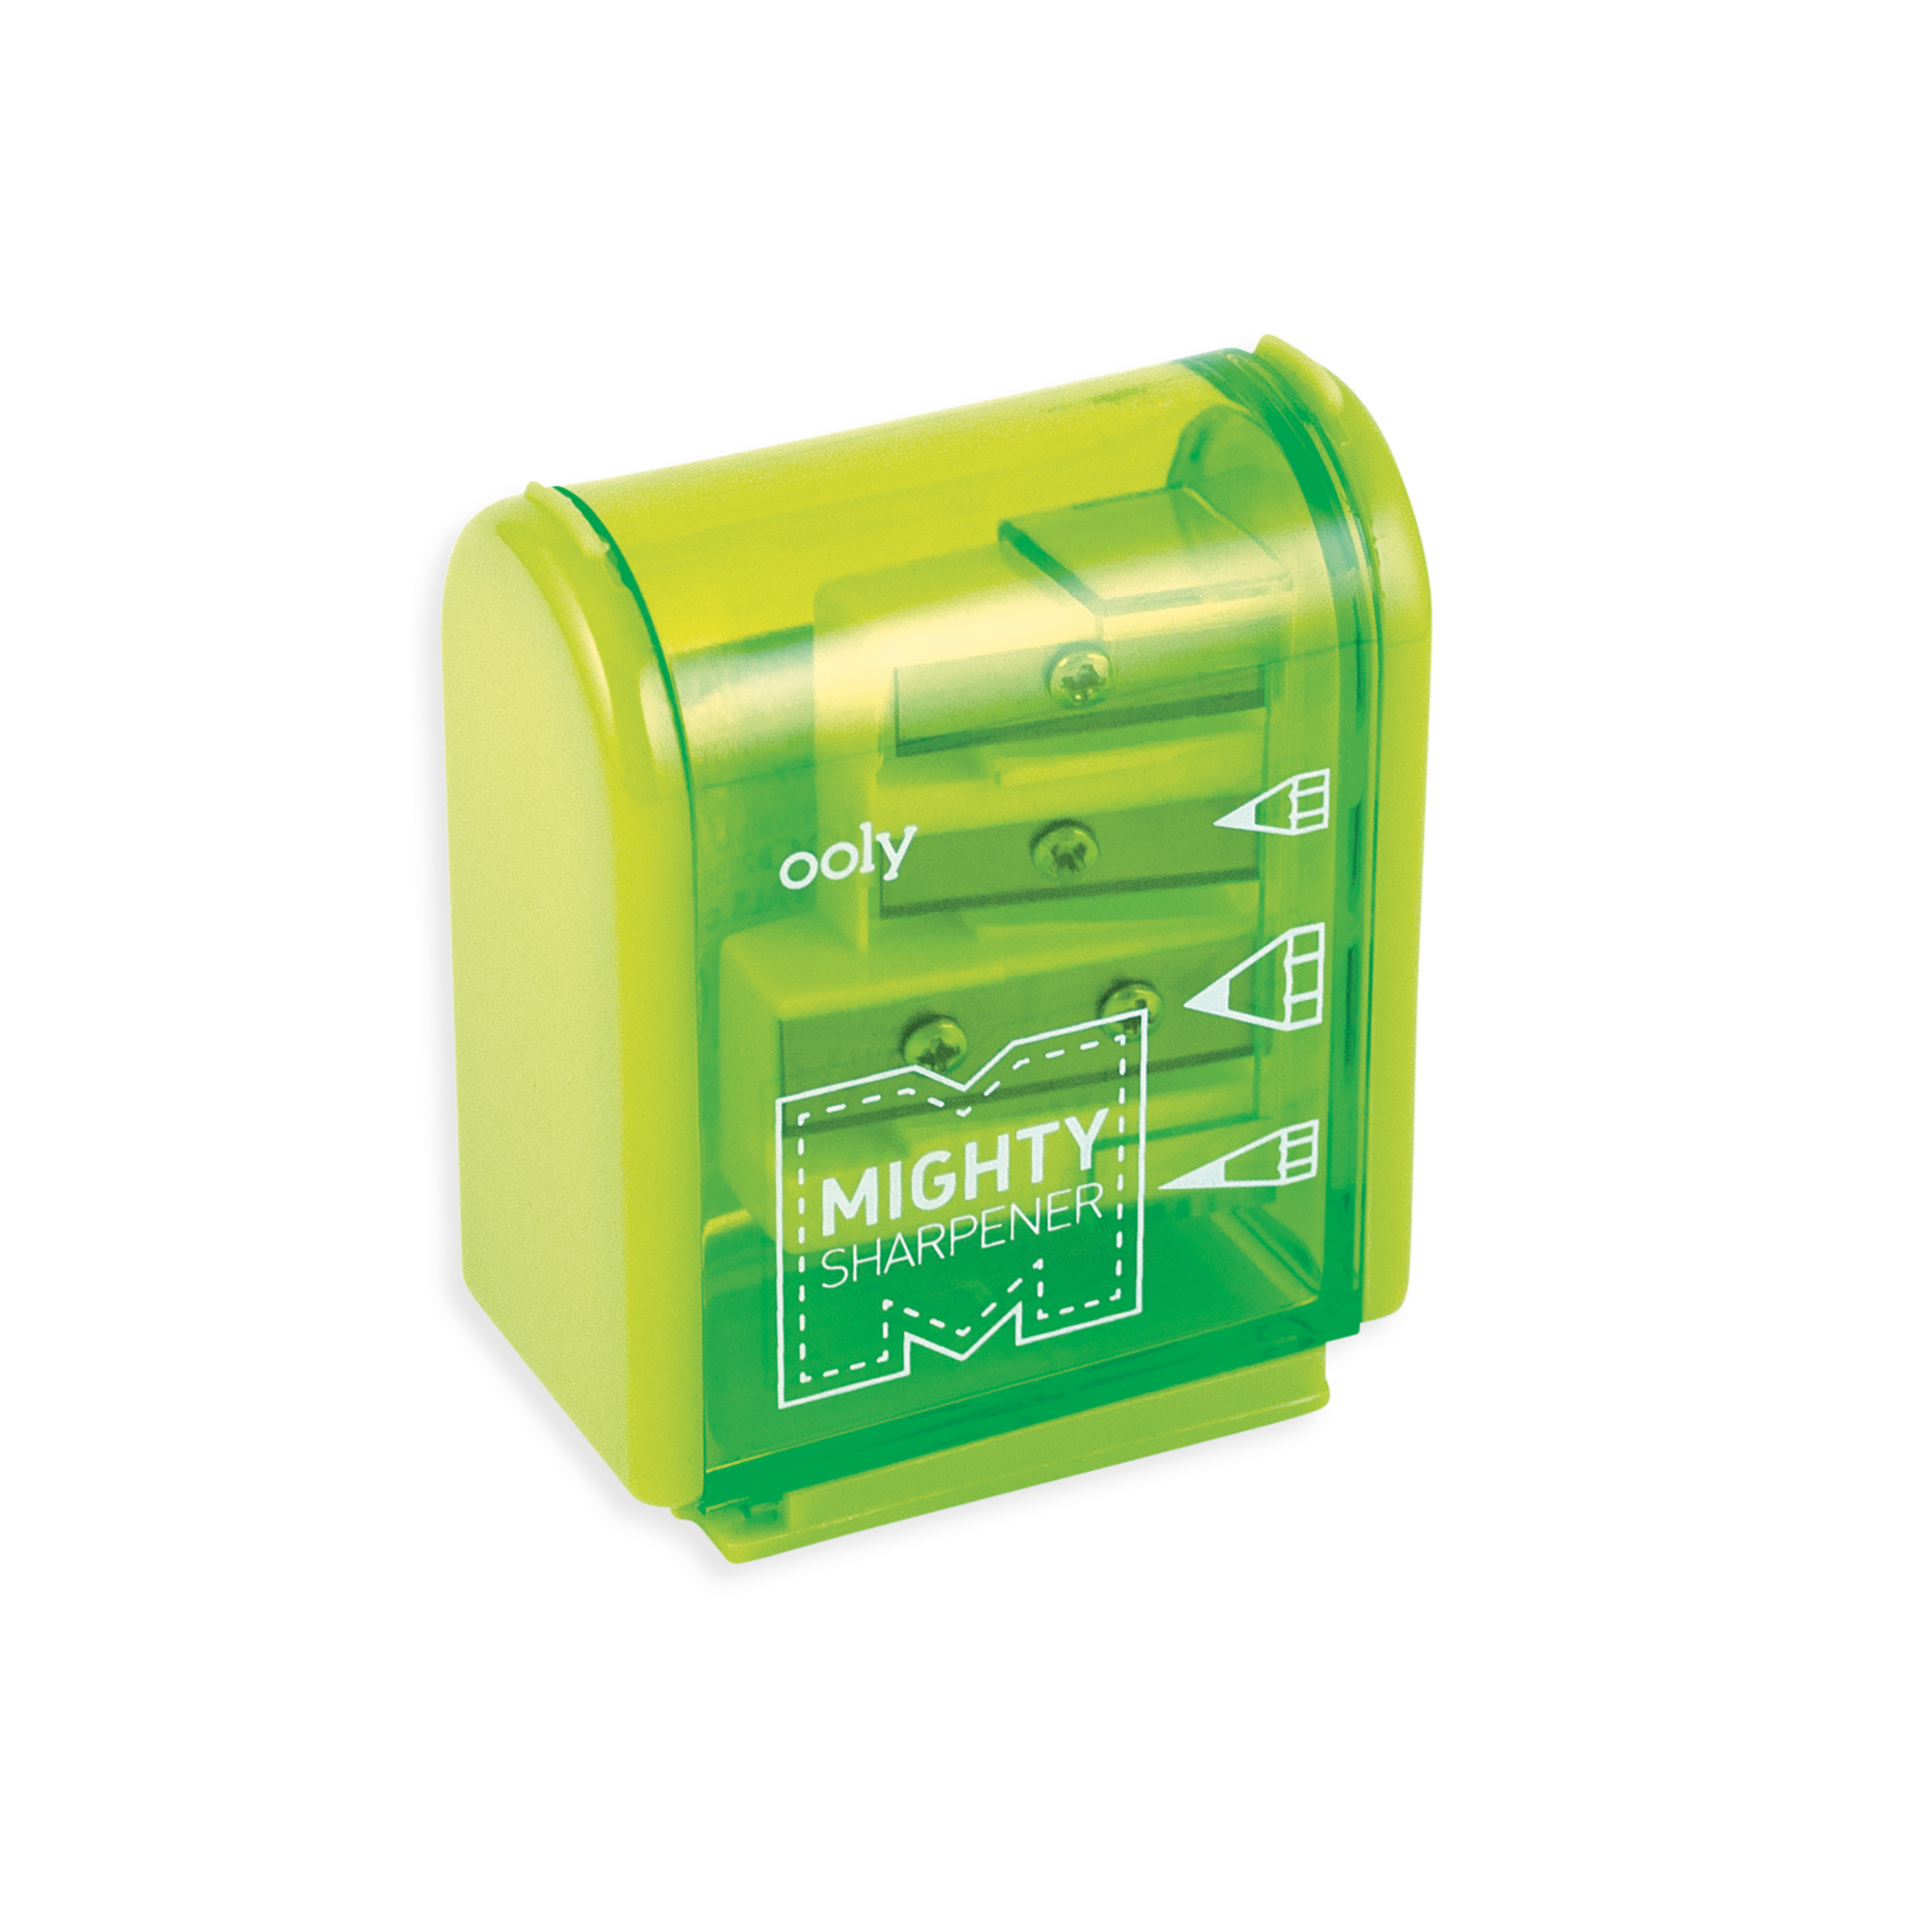 Green OOLY Mighty pencil sharpener with 3 hole sharpeners